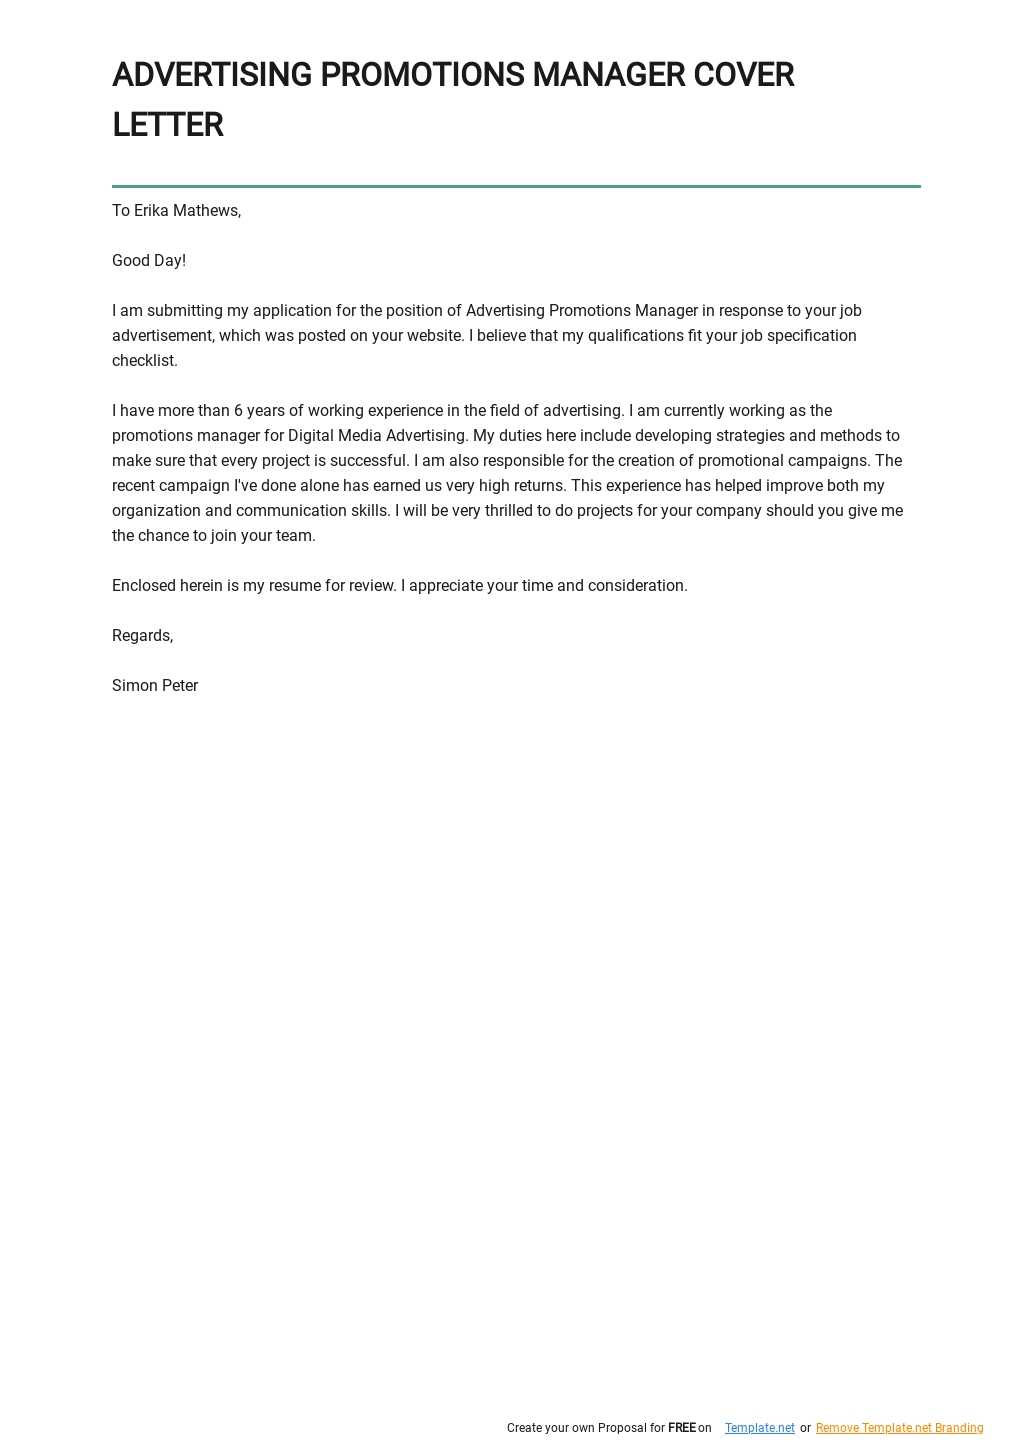 Free Advertising Promotions Manager Cover Letter Template.jpe